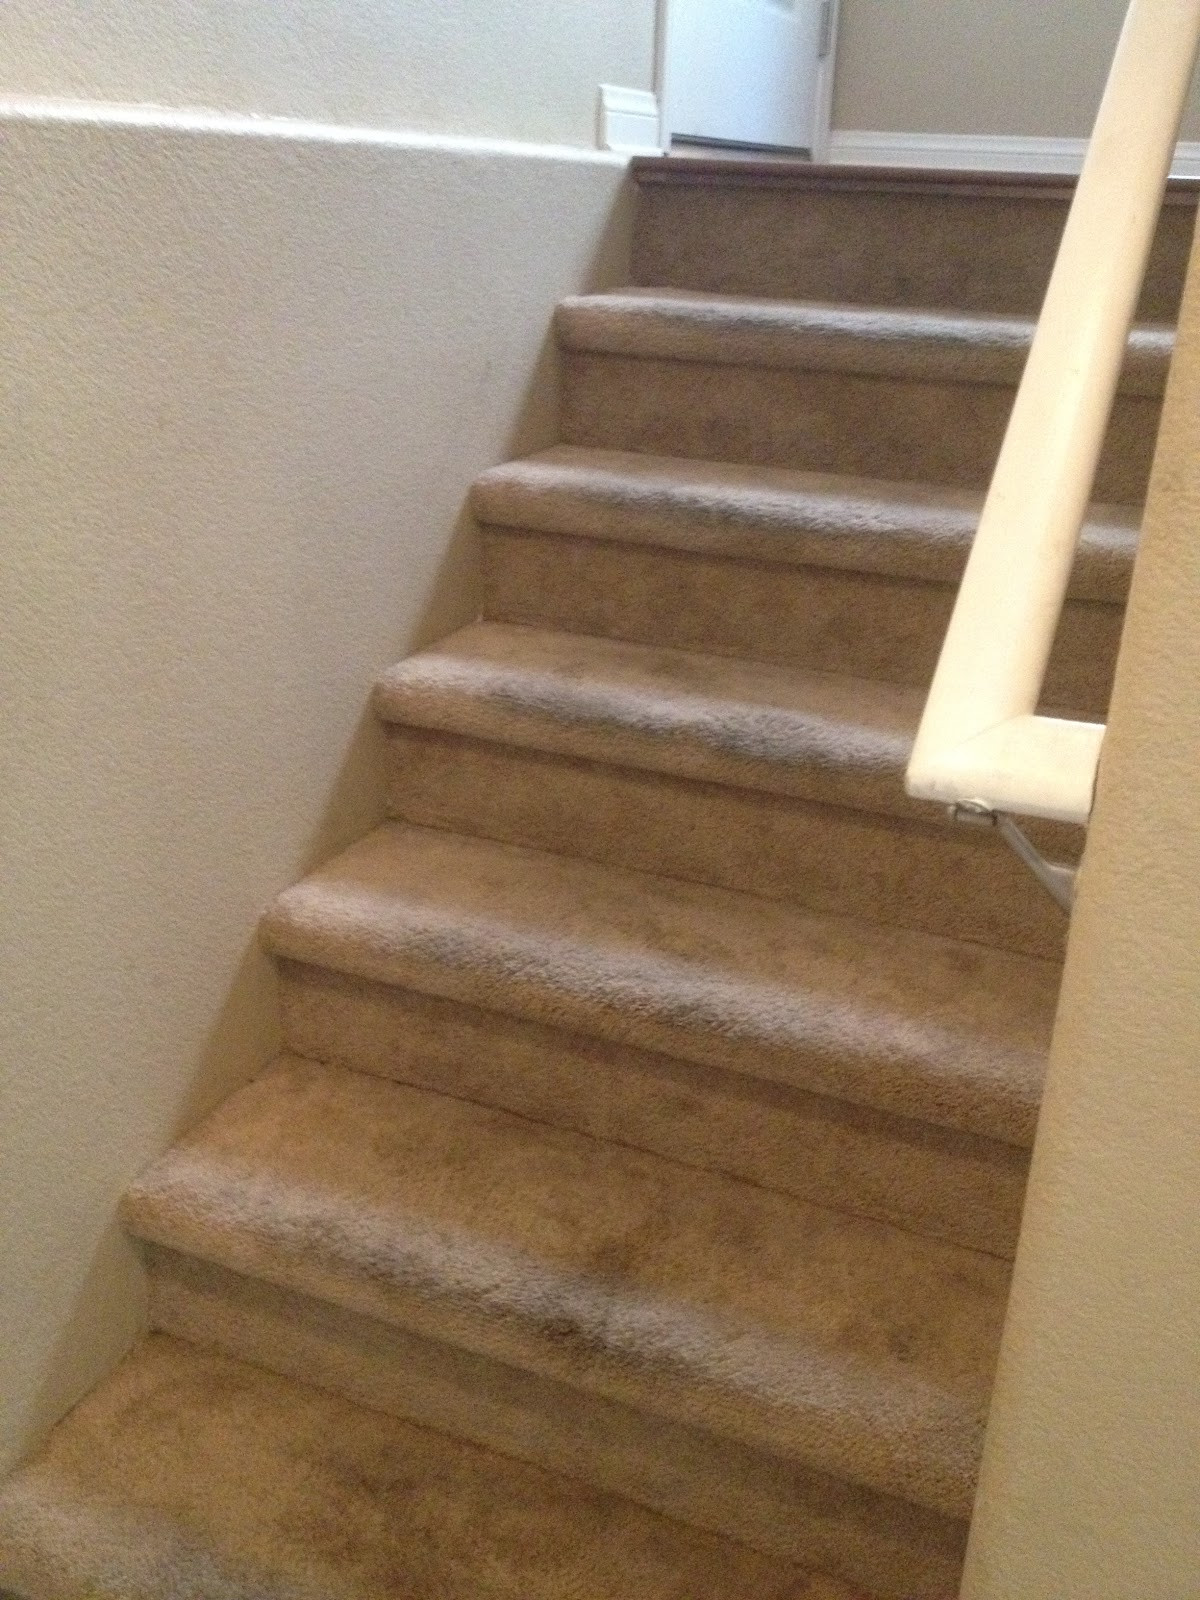 DIY Wooden Steps
 Choosing Contentment Inexpensive DIY Carpet to Wood Stairs